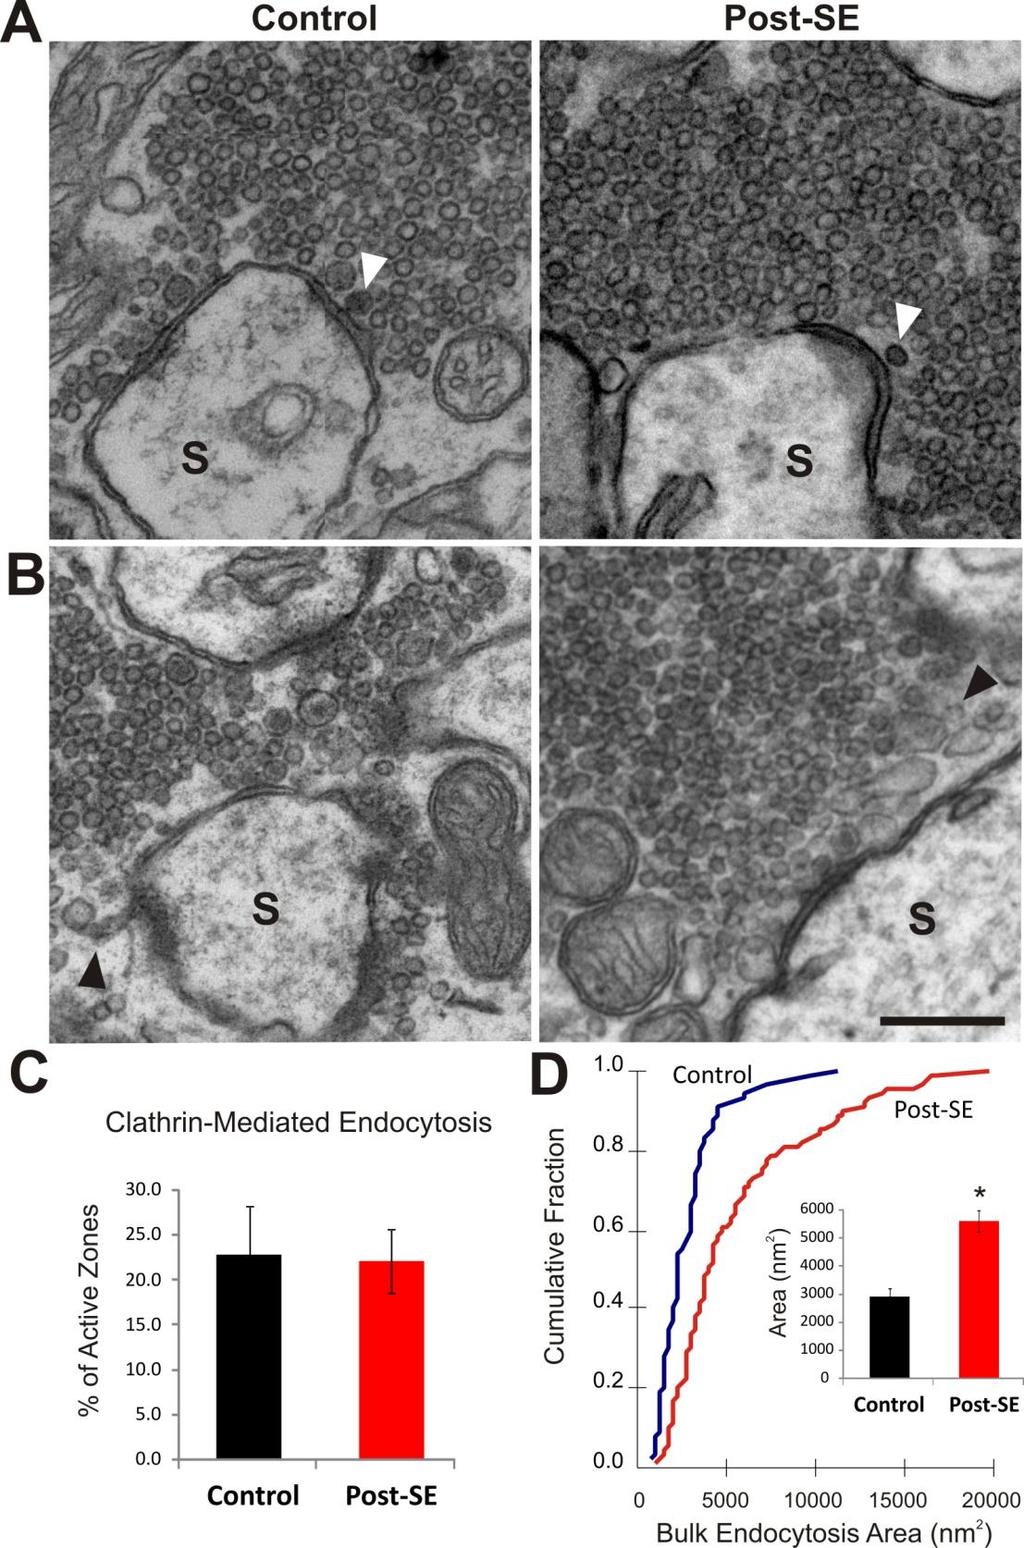 Fig. 5. Representative TEM images of active zones (AZs) in MFBs exhibiting structural signs of clathrin-mediated endocytosis and bulk endocytosis in control and epileptic rats.